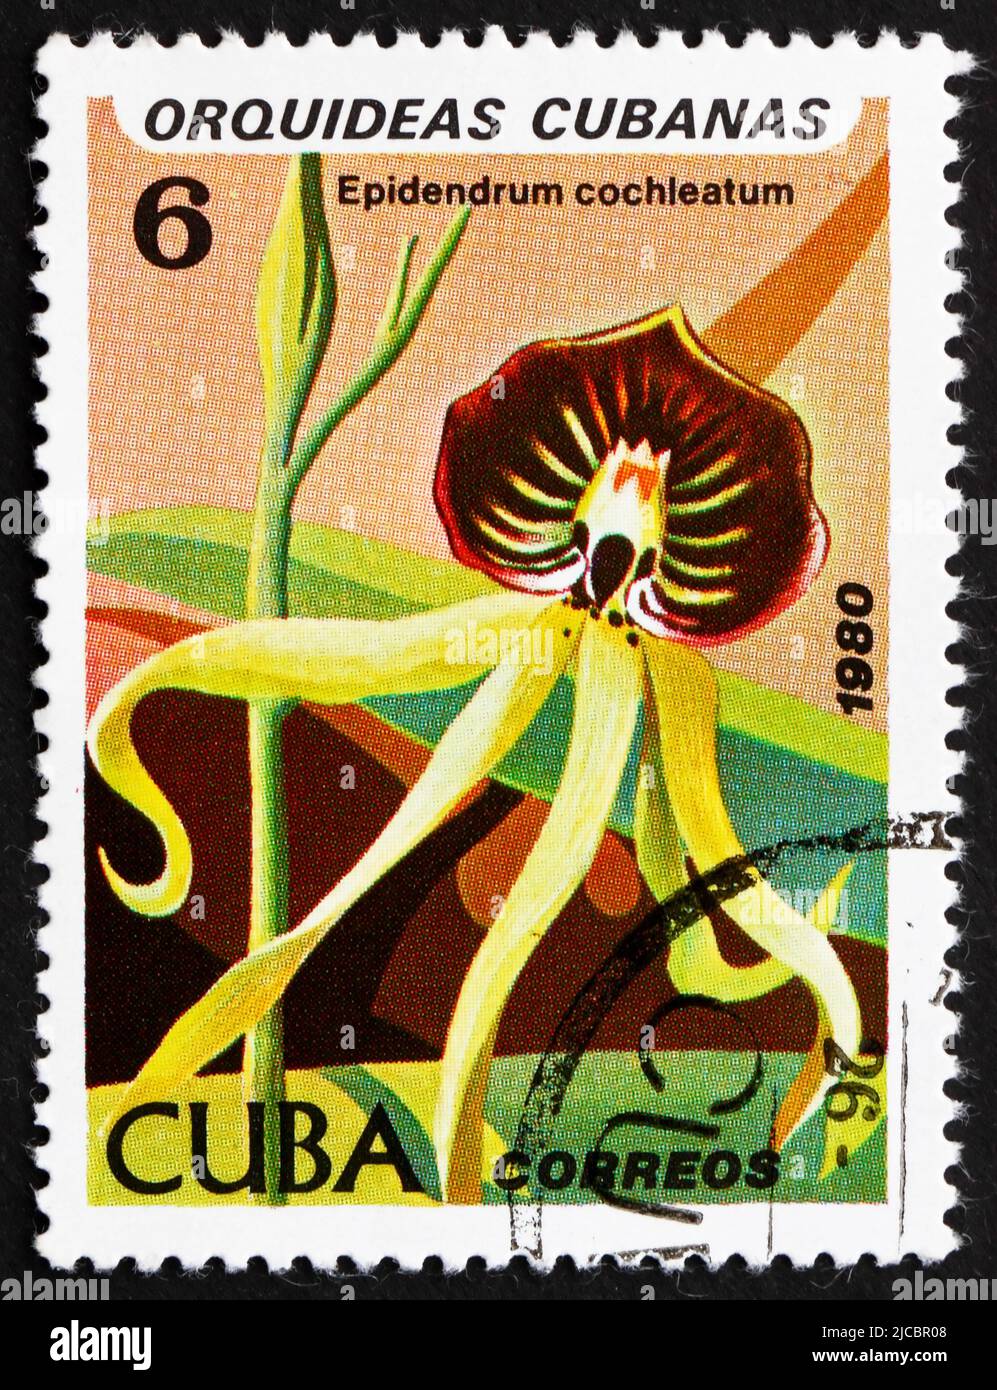 CUBA - CIRCA 1980: a stamp printed in the Cuba shows Black Orchid, Epidendrum Cochieatum, Orchid, circa 1980 Stock Photo